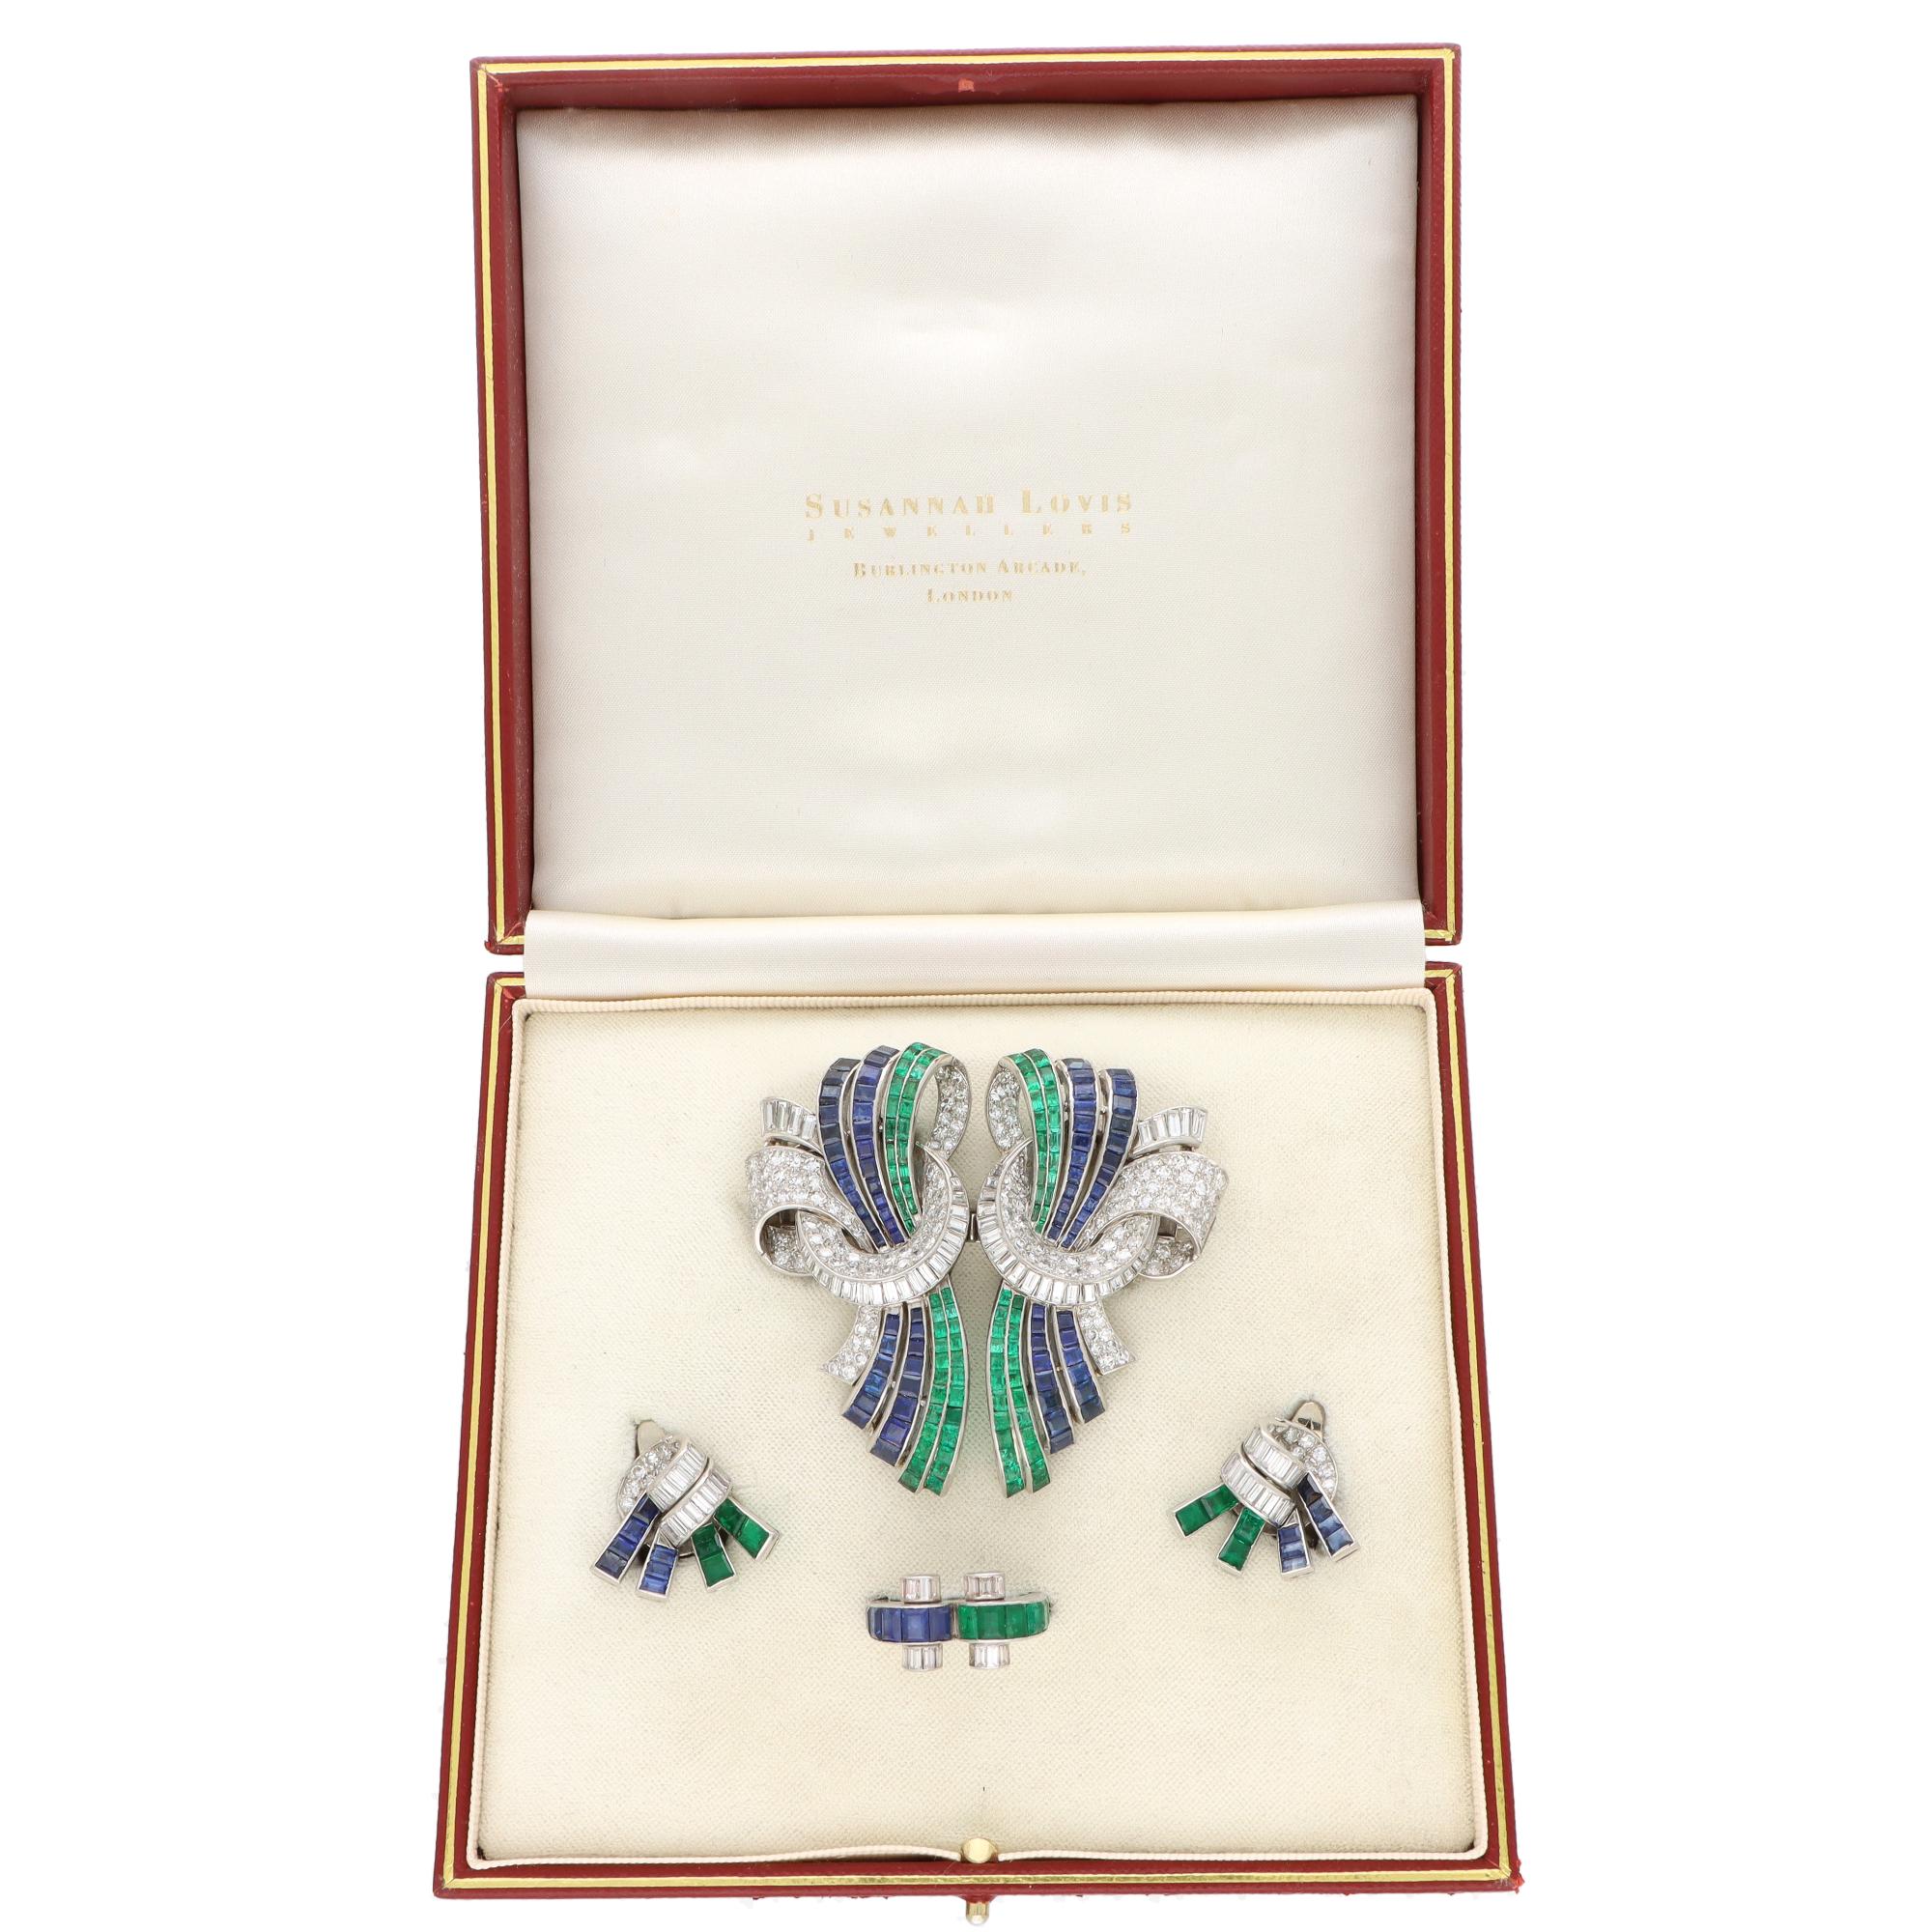 A rare vintage Art Deco Drayson emerald, sapphire and diamond brooch, earring and ring suite set in platinum.

This visually staggering suite is composed of a ring, earrings and a convertible clip brooch; all of which are perfectly complimentary of